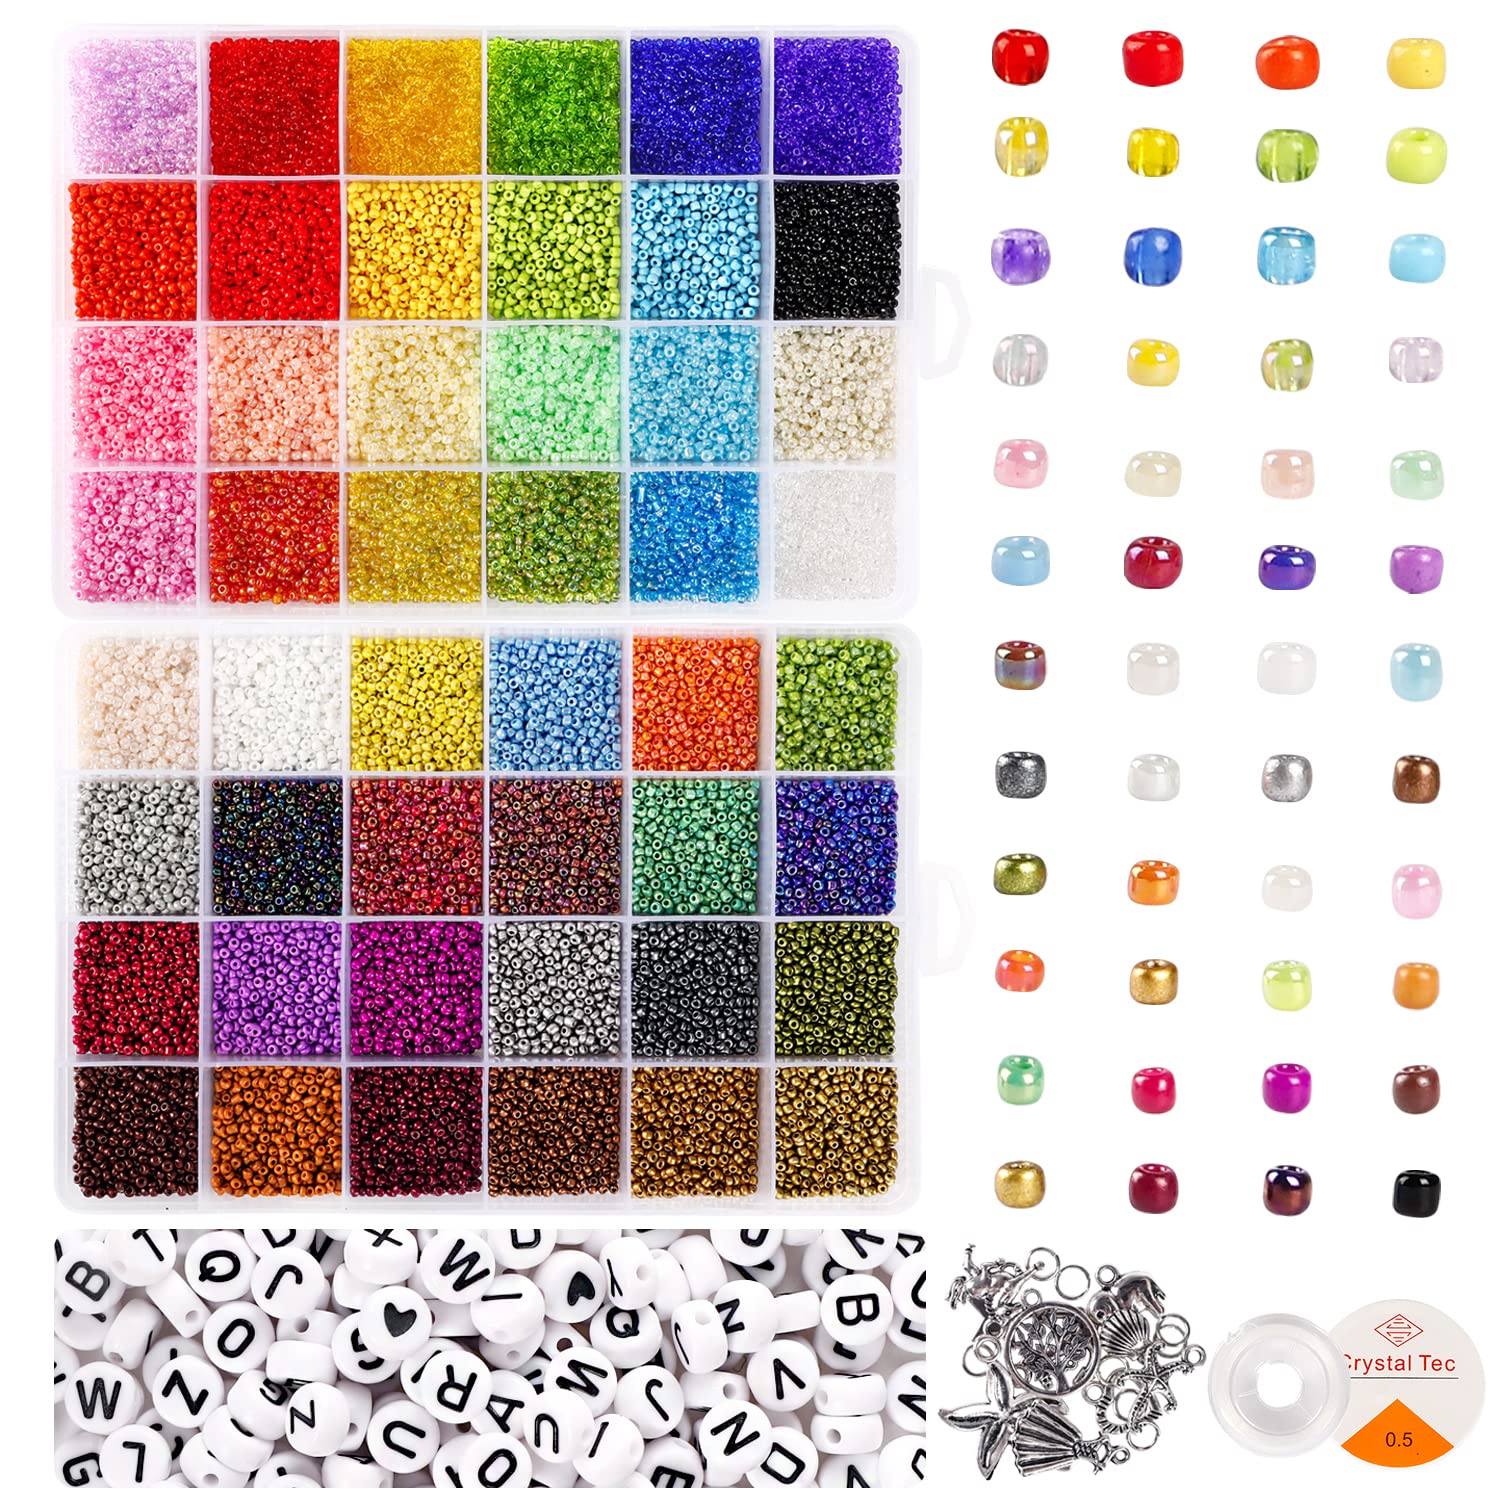 UOONY 35000pcs 2mm Glass Seed Beads for Jewelry Making Kit 250pcs Alphabet  Letter Beads Tiny Beads